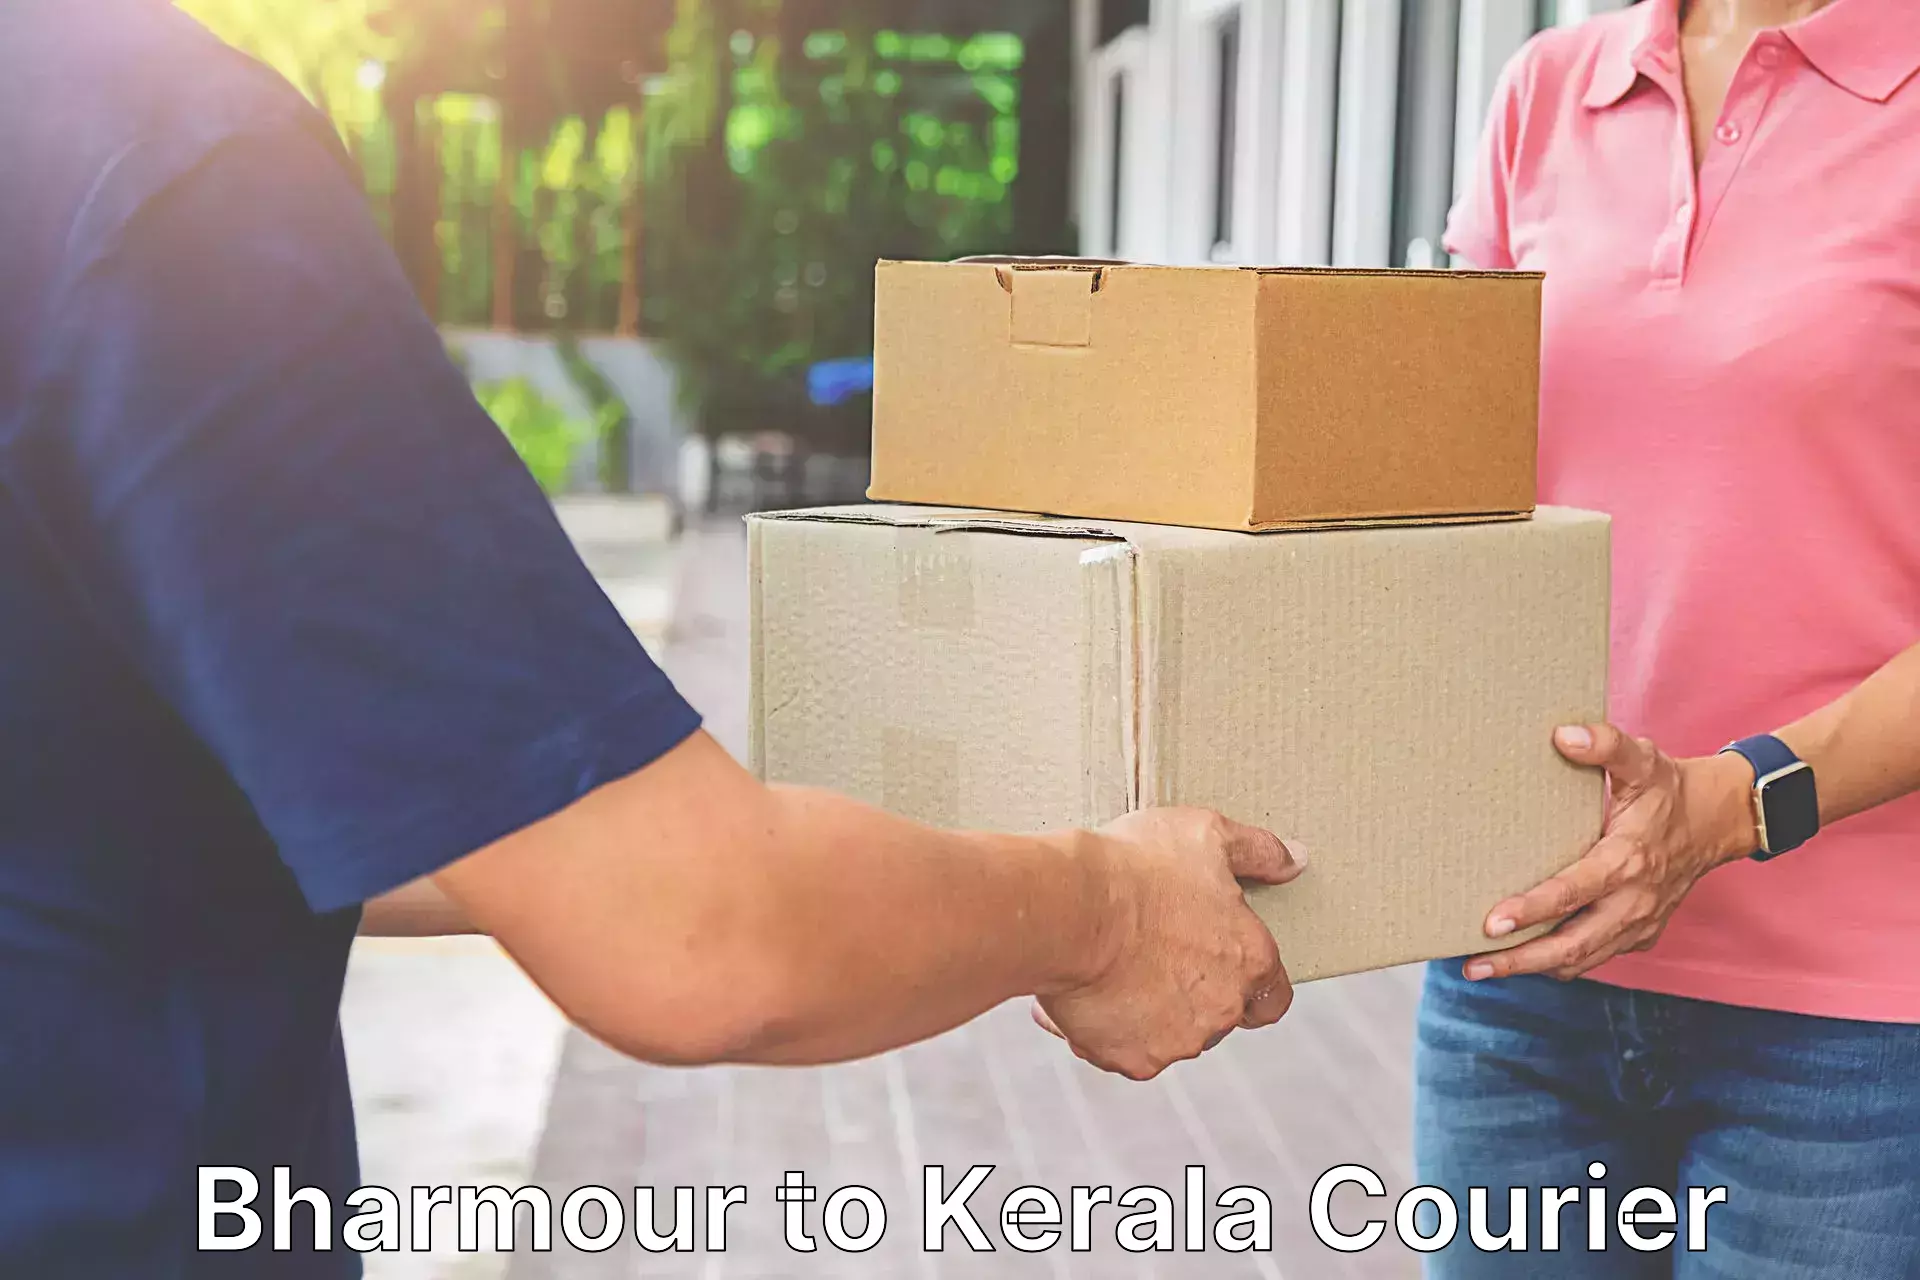 Automated shipping processes Bharmour to Kerala